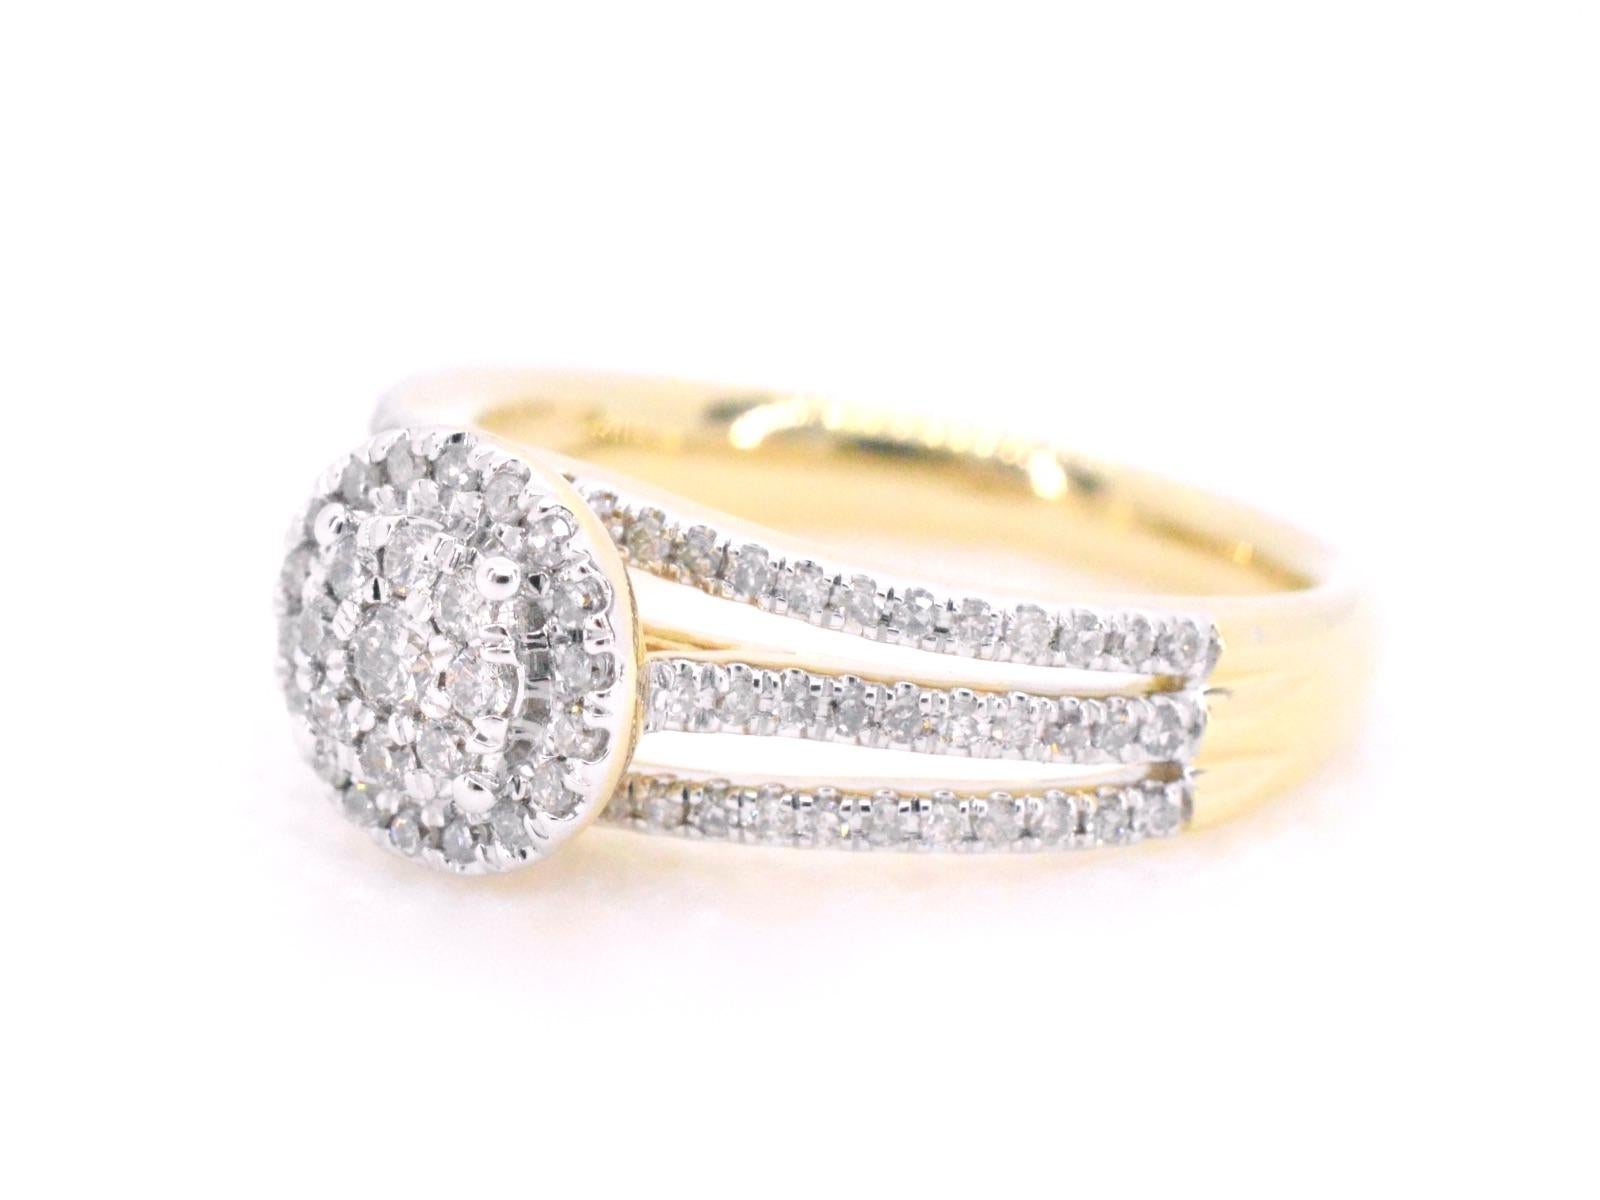 This exquisite gold entourage ring features a stunning combination of brilliant and round cut diamonds. The diamonds are arranged in a beautiful entourage setting, creating a breathtaking display of sparkle and fire. The high-quality gold band adds